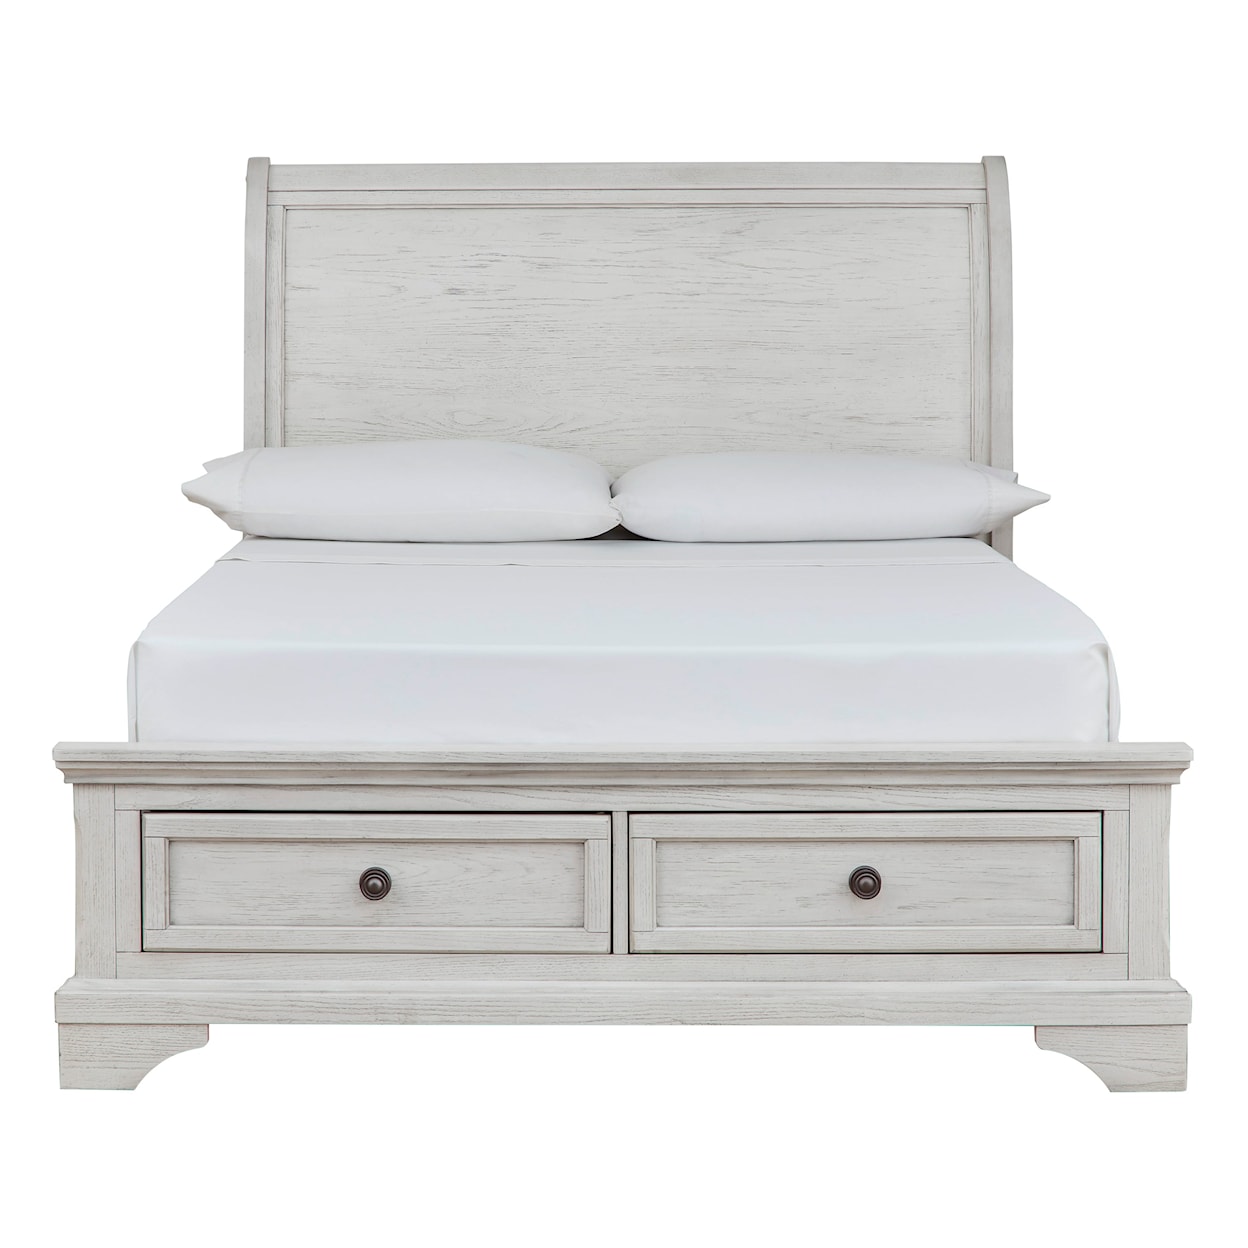 Signature Design Robbinsdale Full Sleigh Bed with Storage